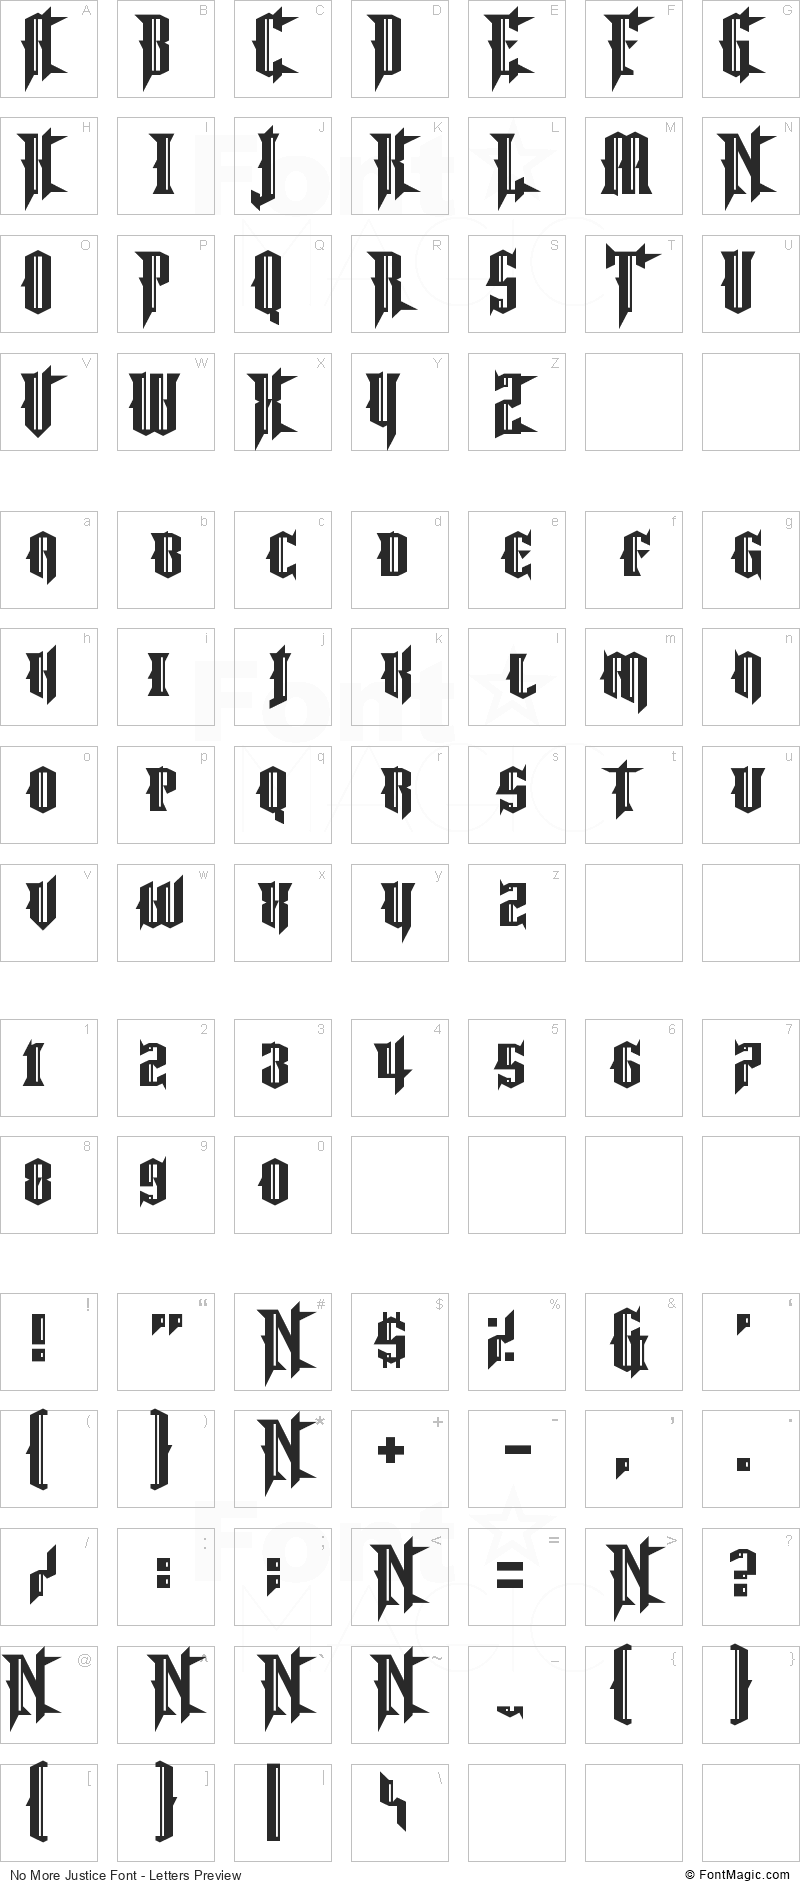 No More Justice Font - All Latters Preview Chart